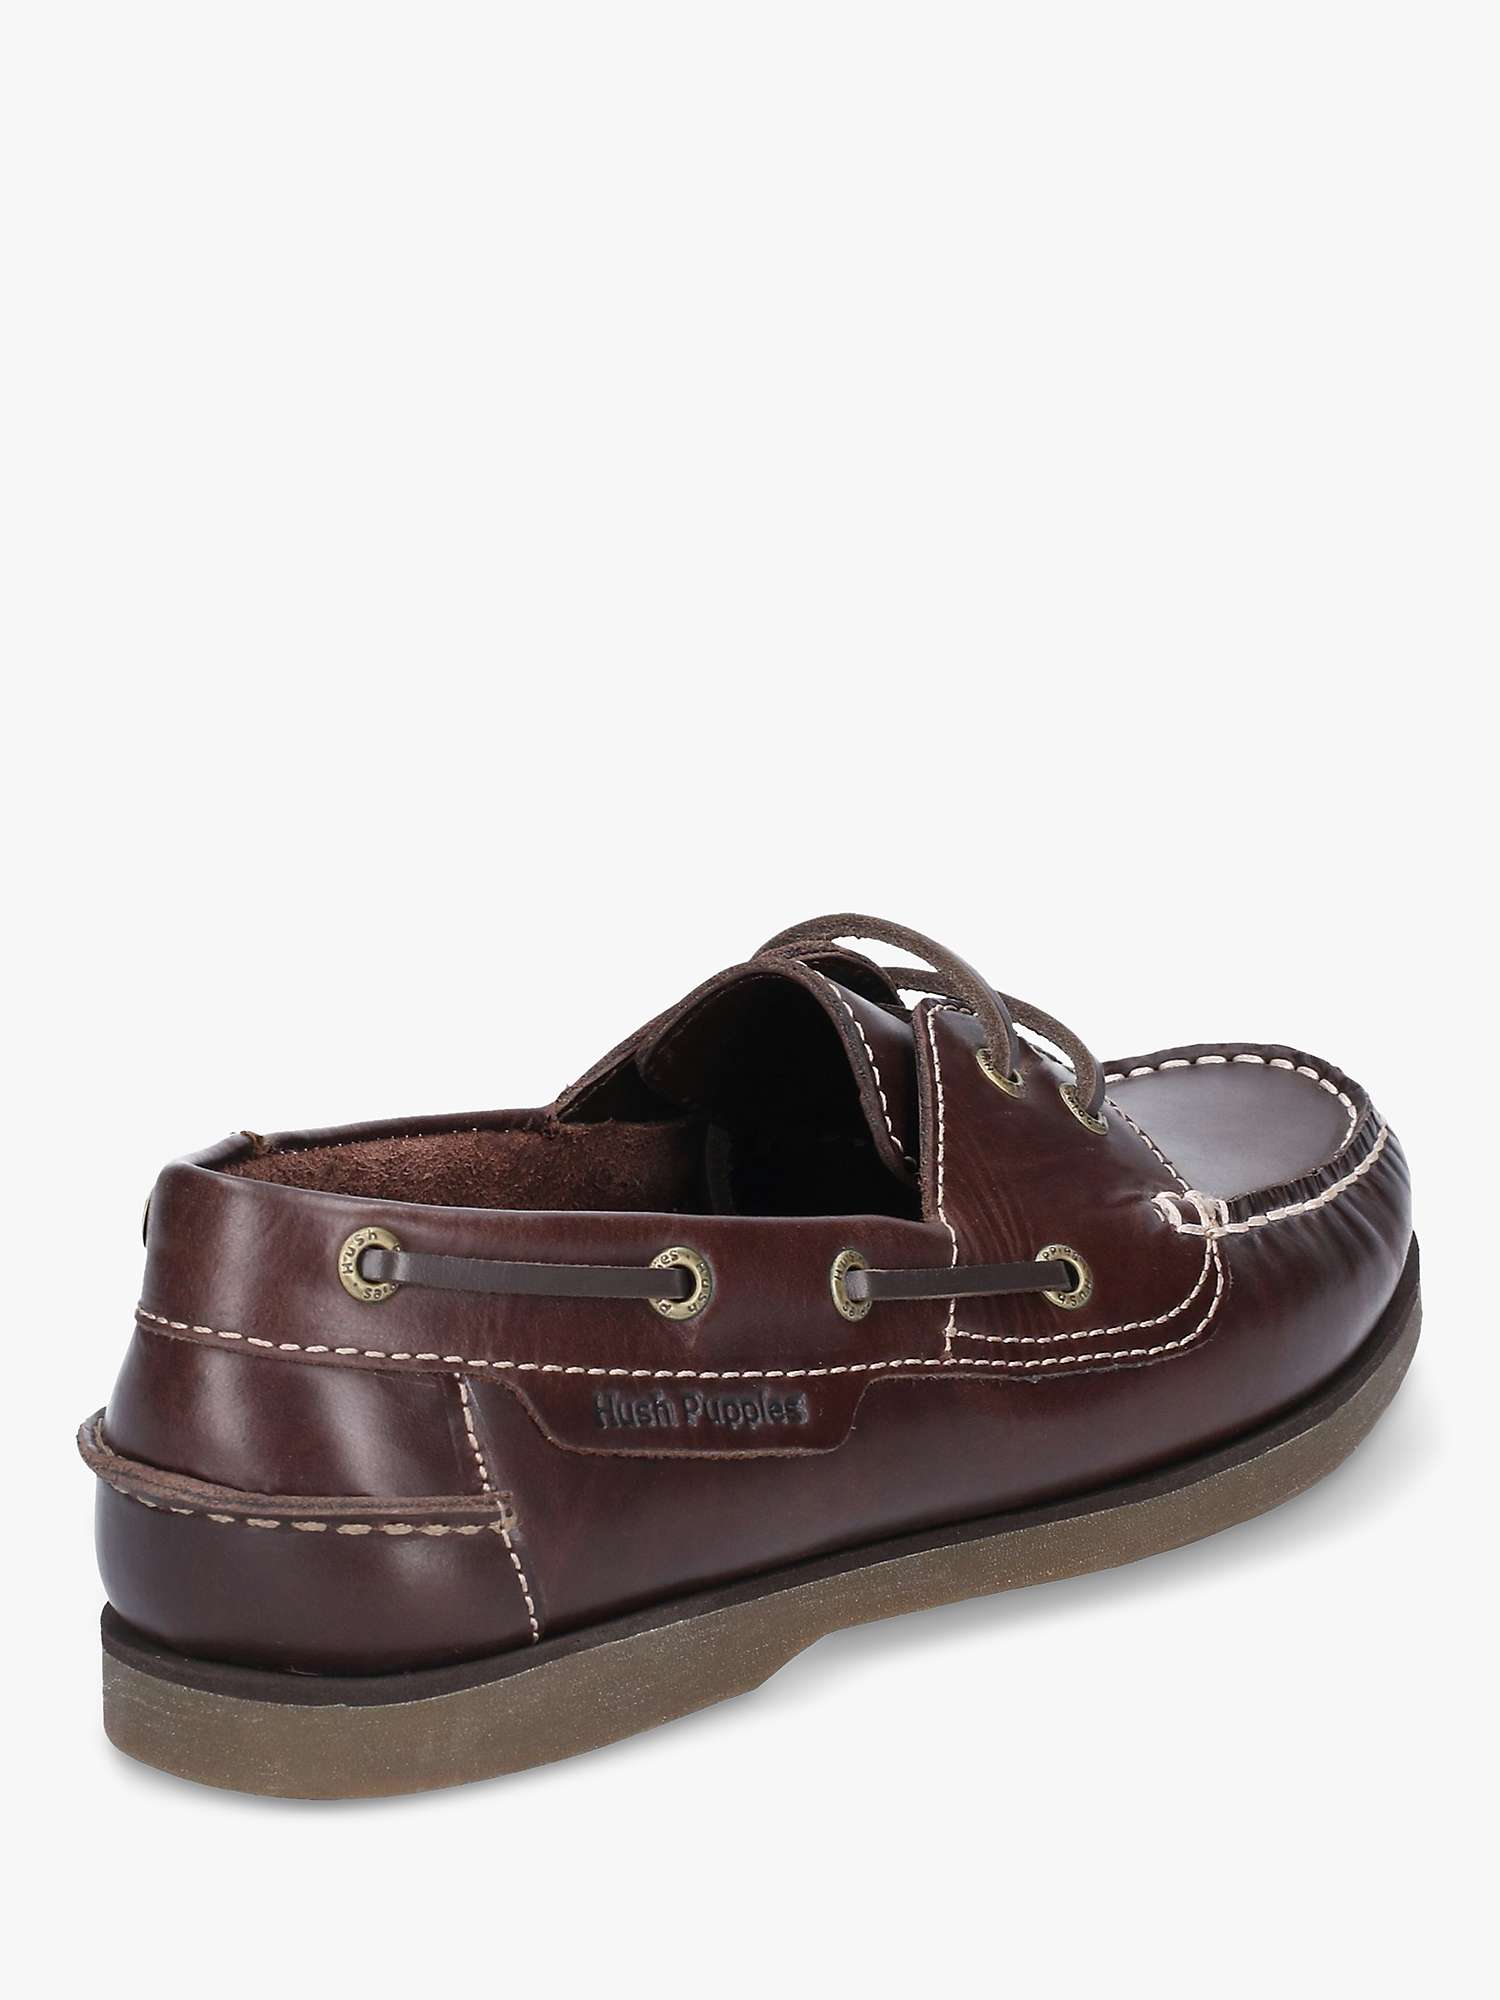 Buy Hush Puppies Henry Leather Boat Shoes Online at johnlewis.com